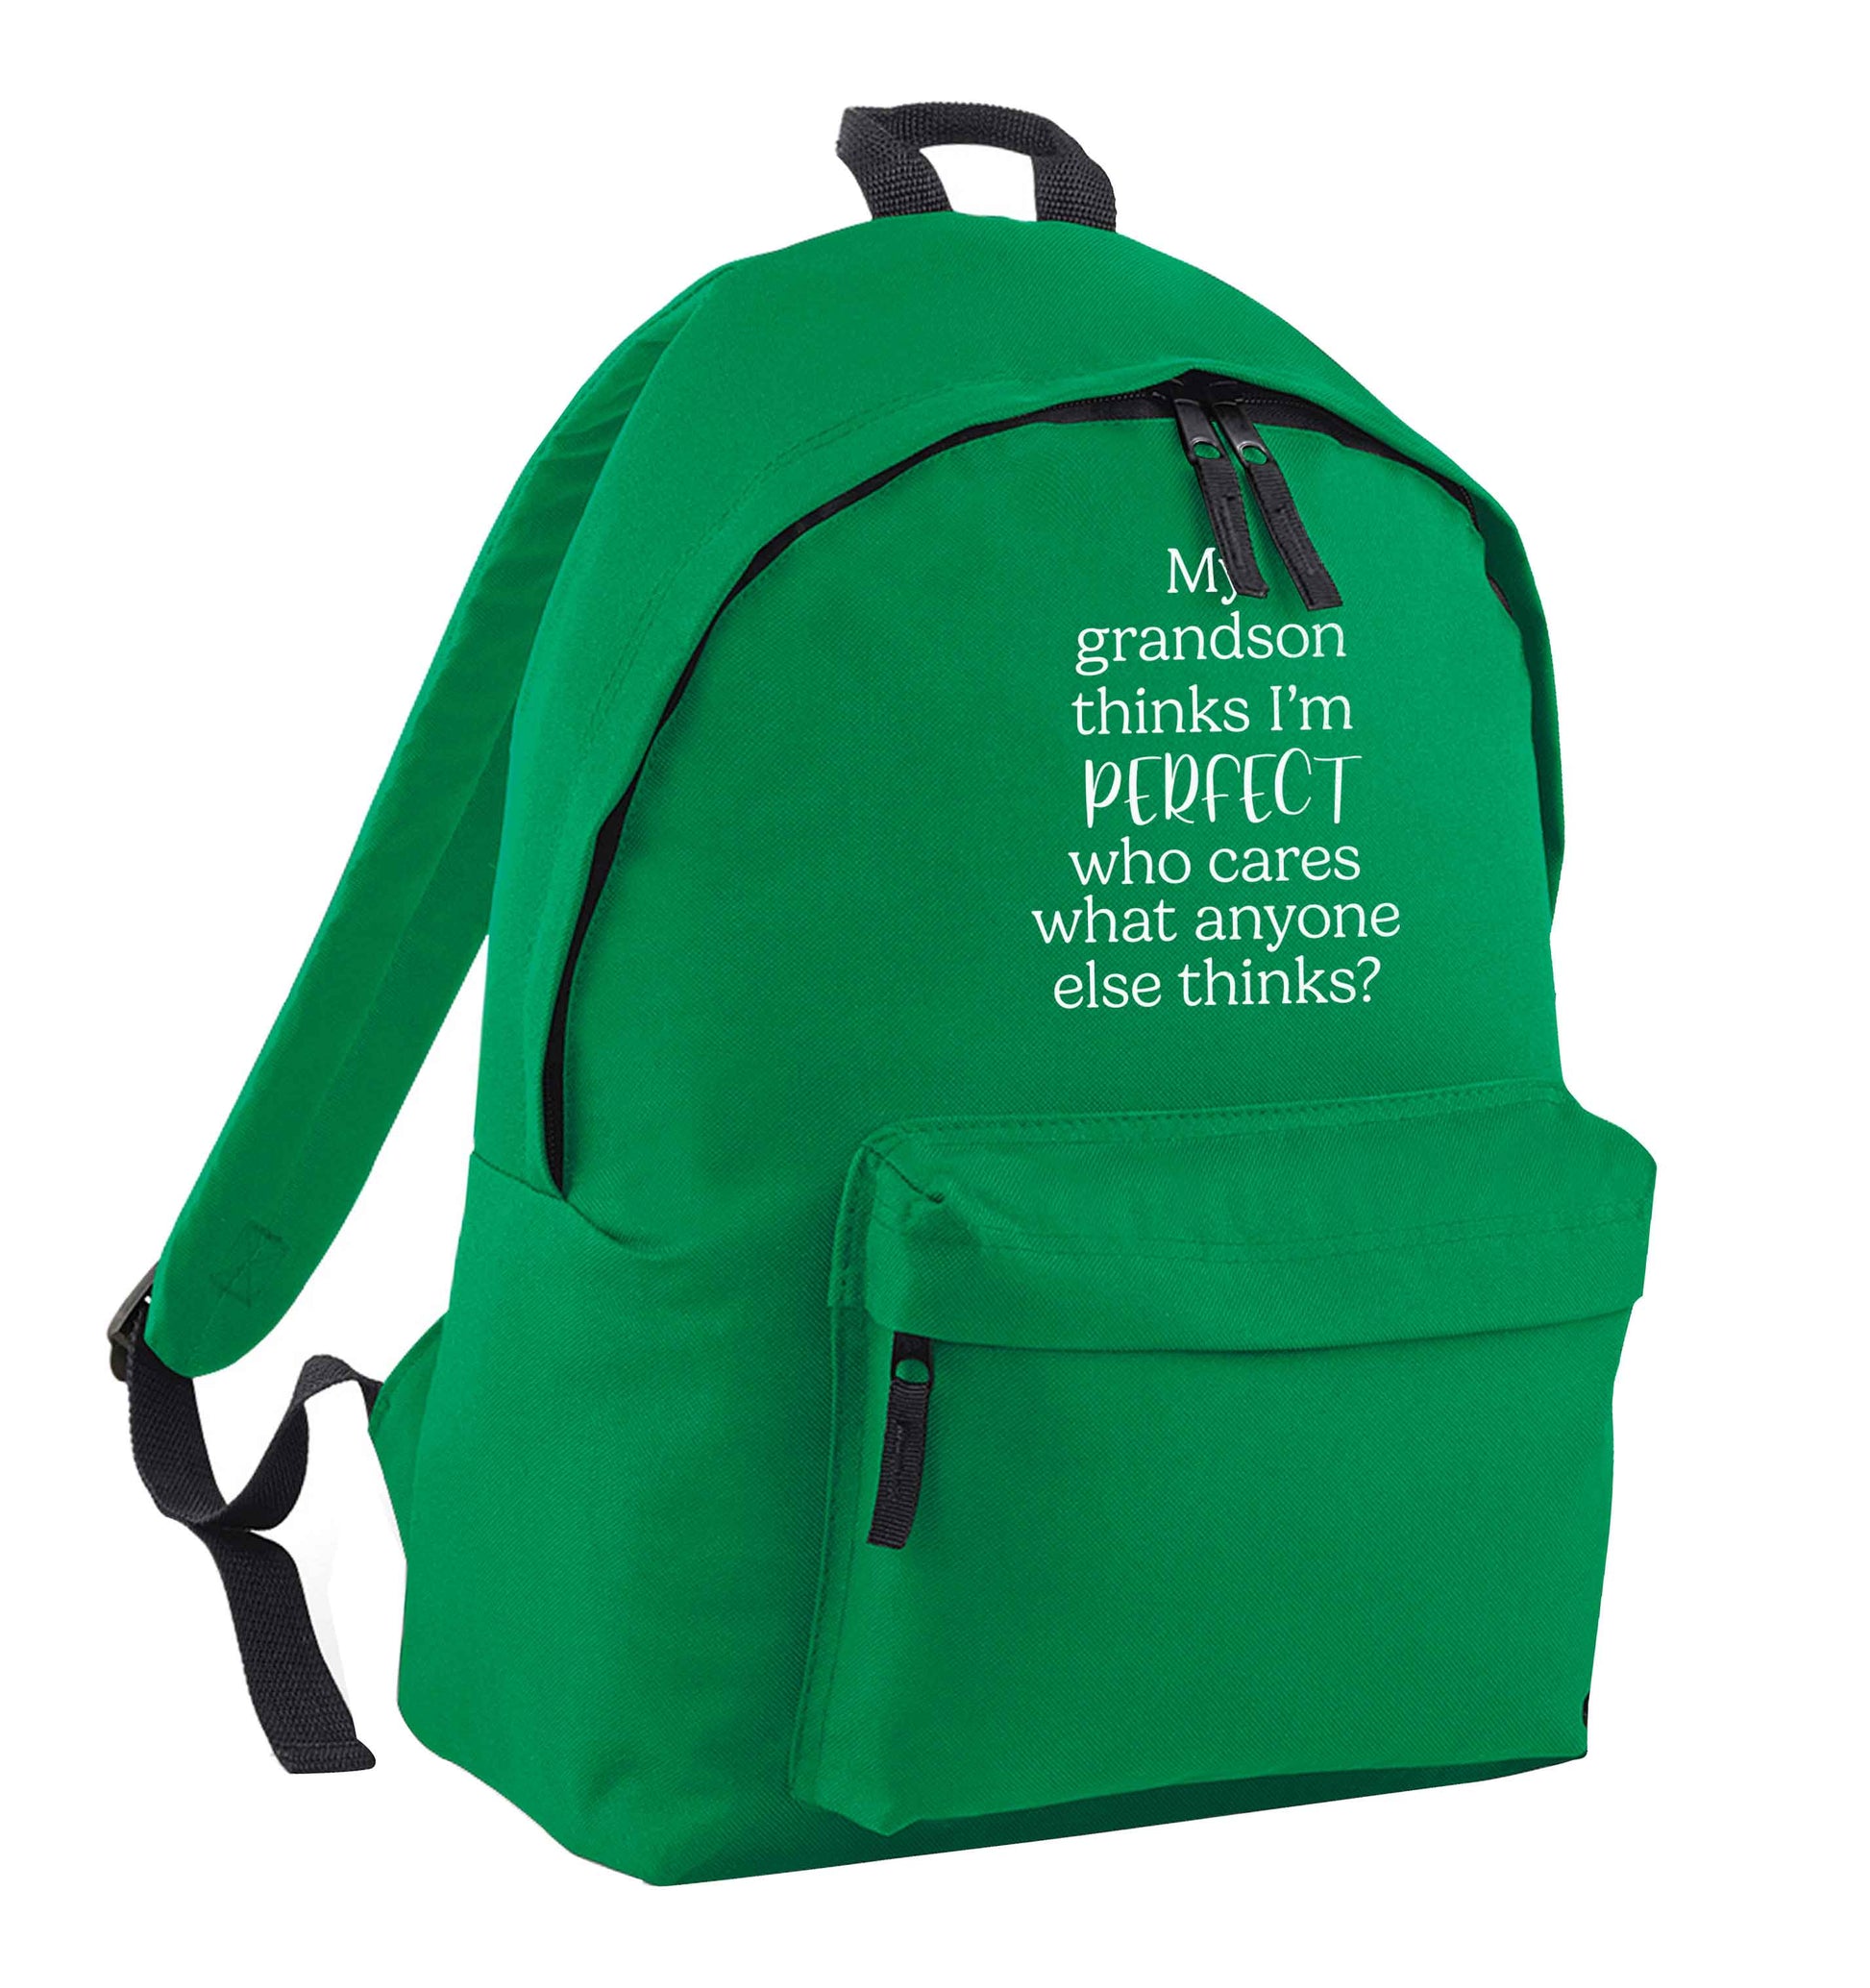 My grandson thinks I'm perfect green adults backpack